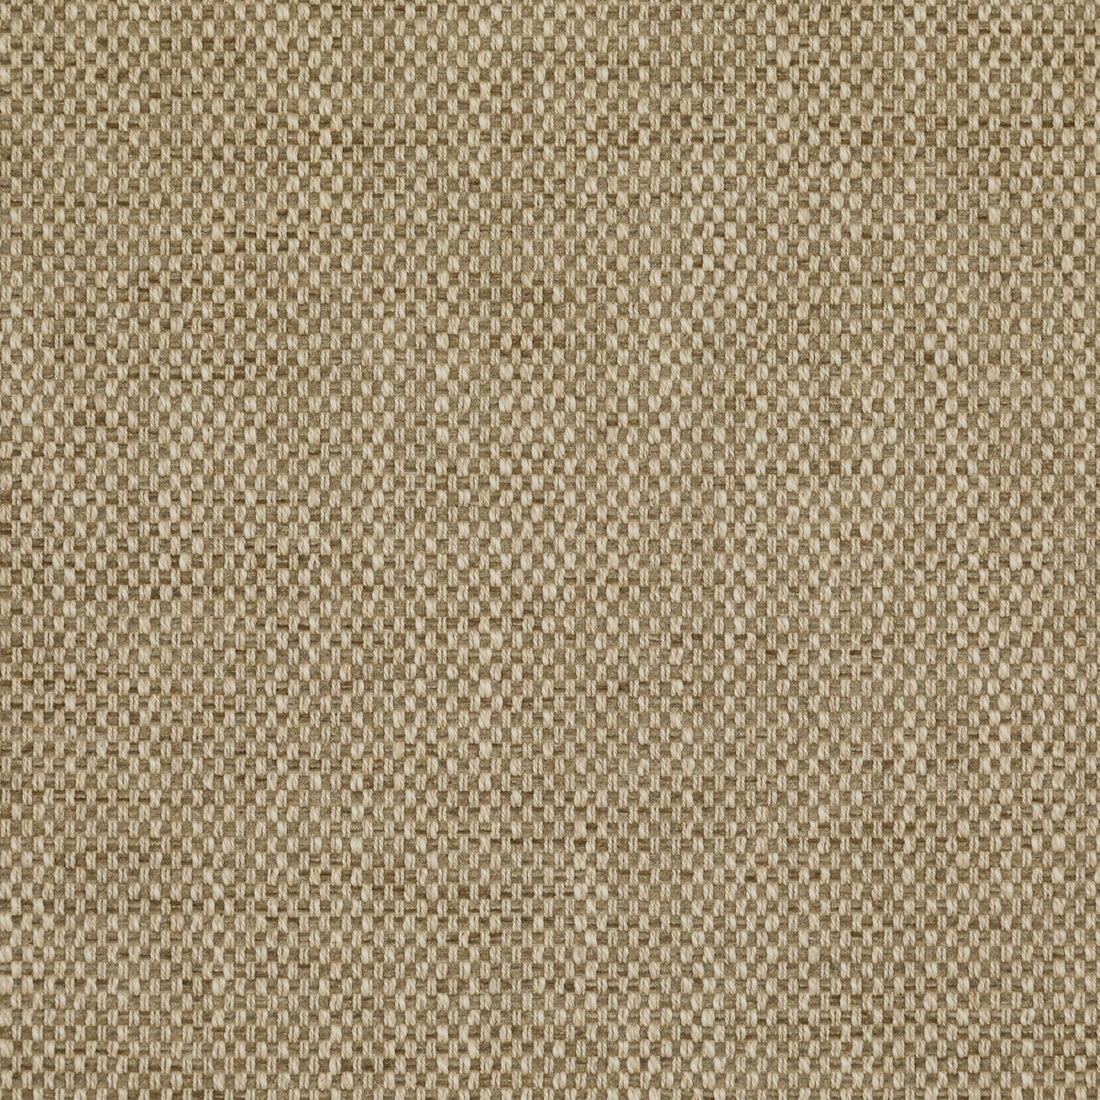 Carlton fabric in hemp color - pattern BFC-3692.106.0 - by Lee Jofa in the Blithfield collection